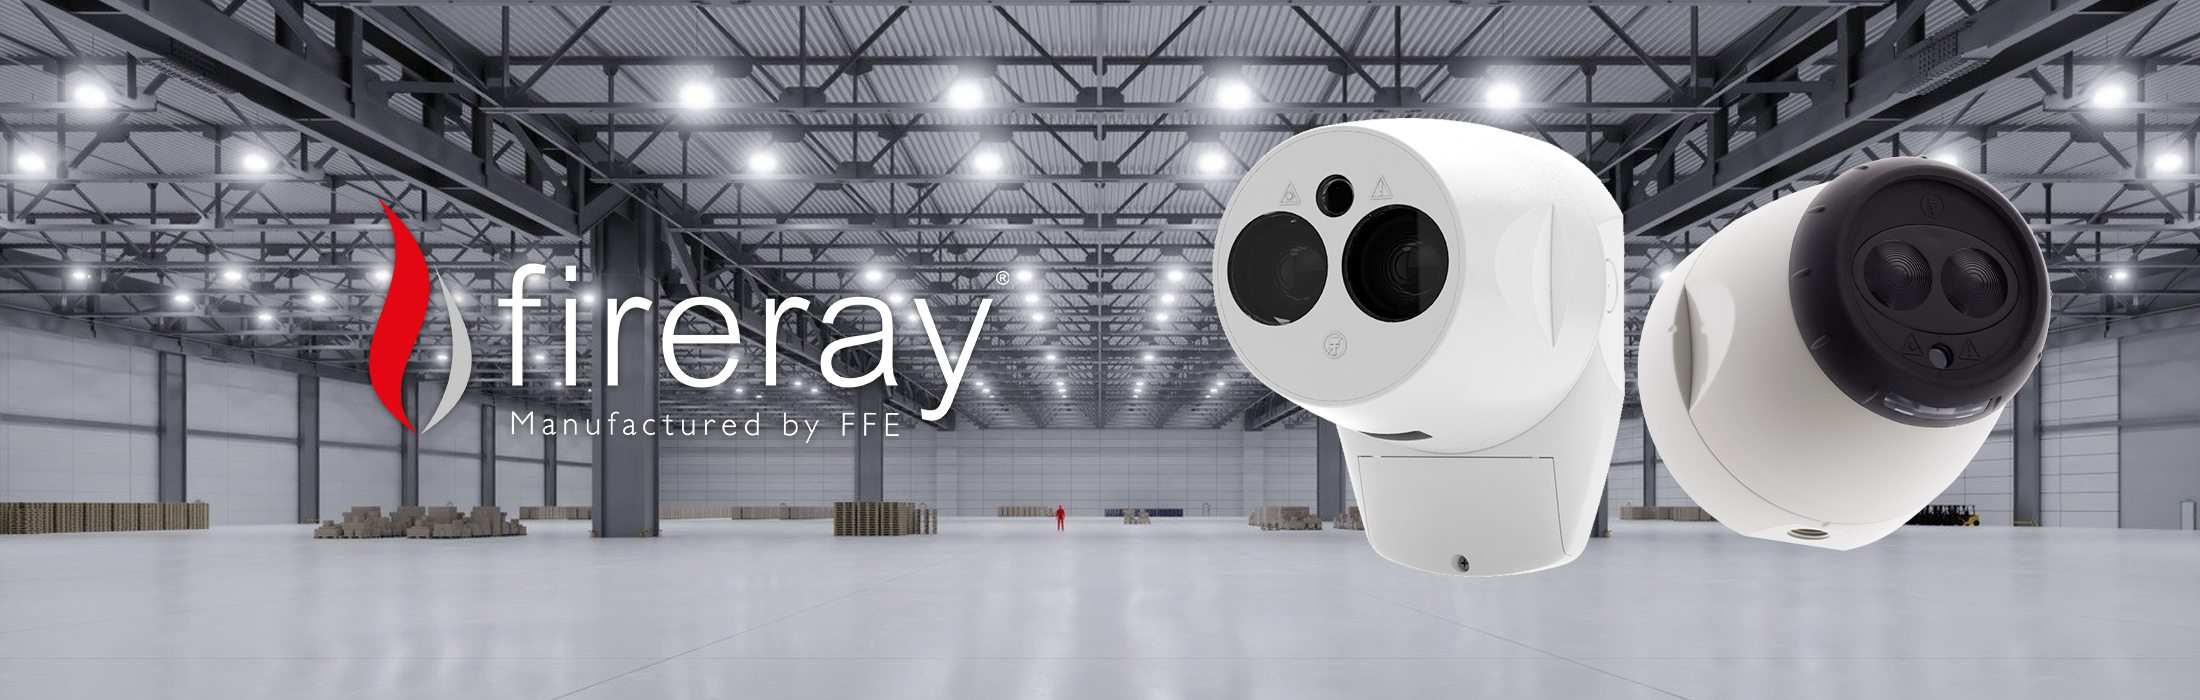 Fireray® Beam Detector range now available from Safe Fire Direct